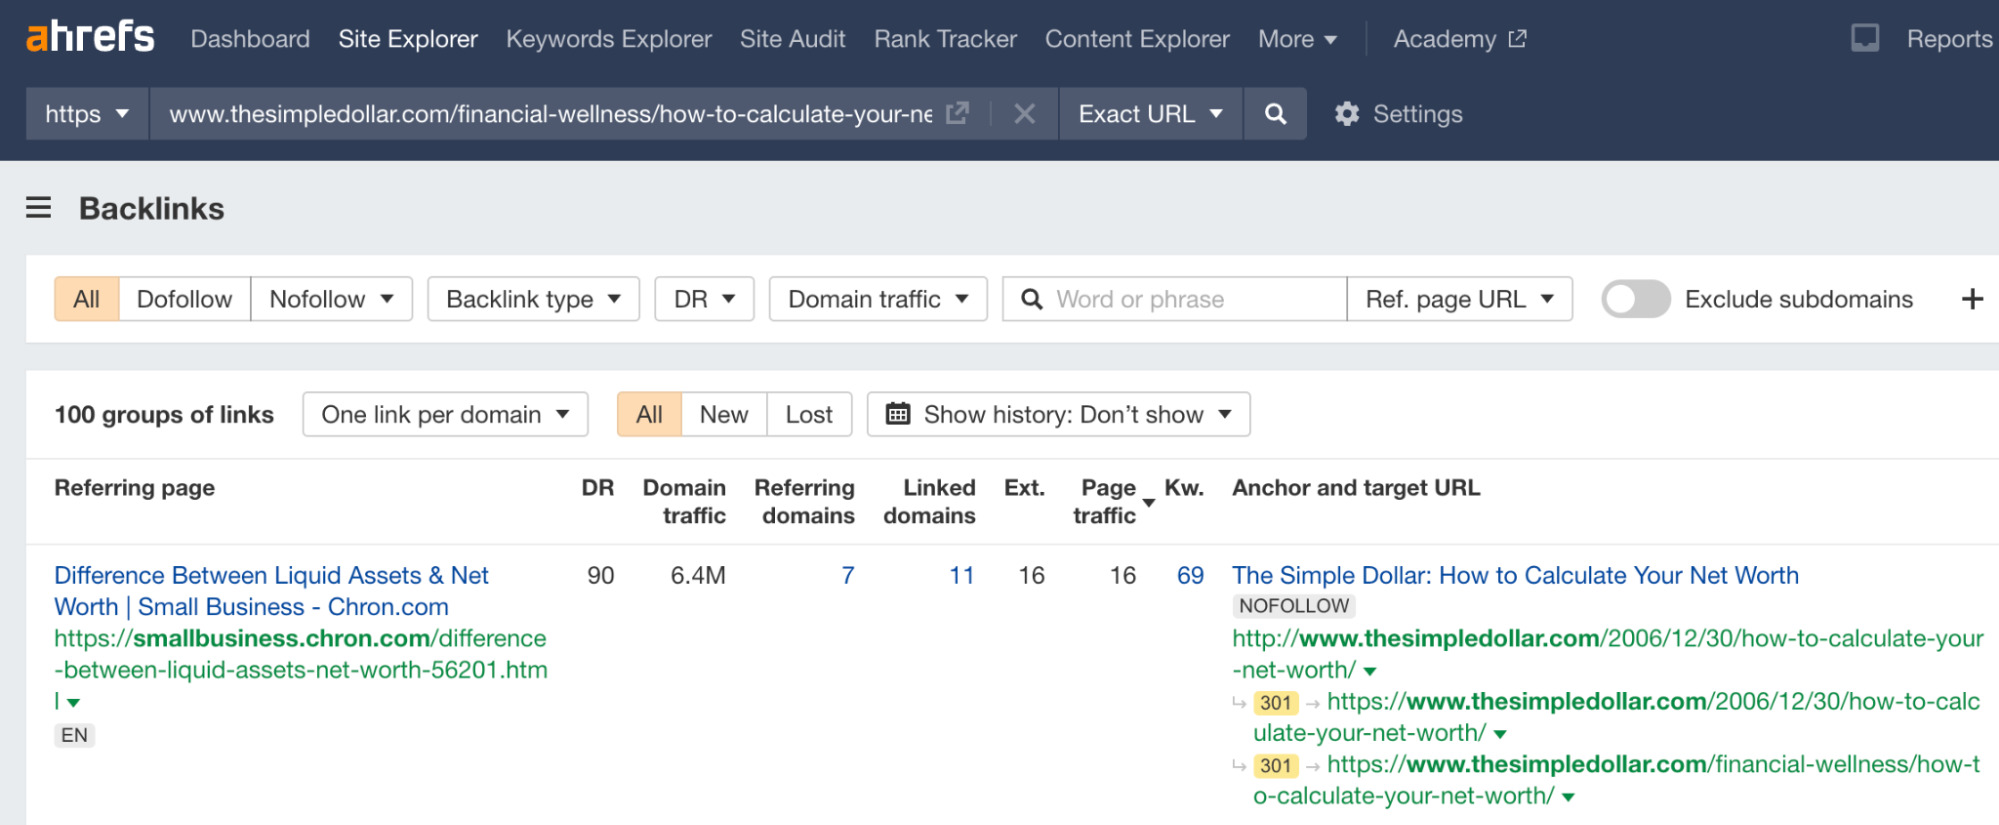 Using the Backlinks report in Ahrefs' Site Explorer to check link quality